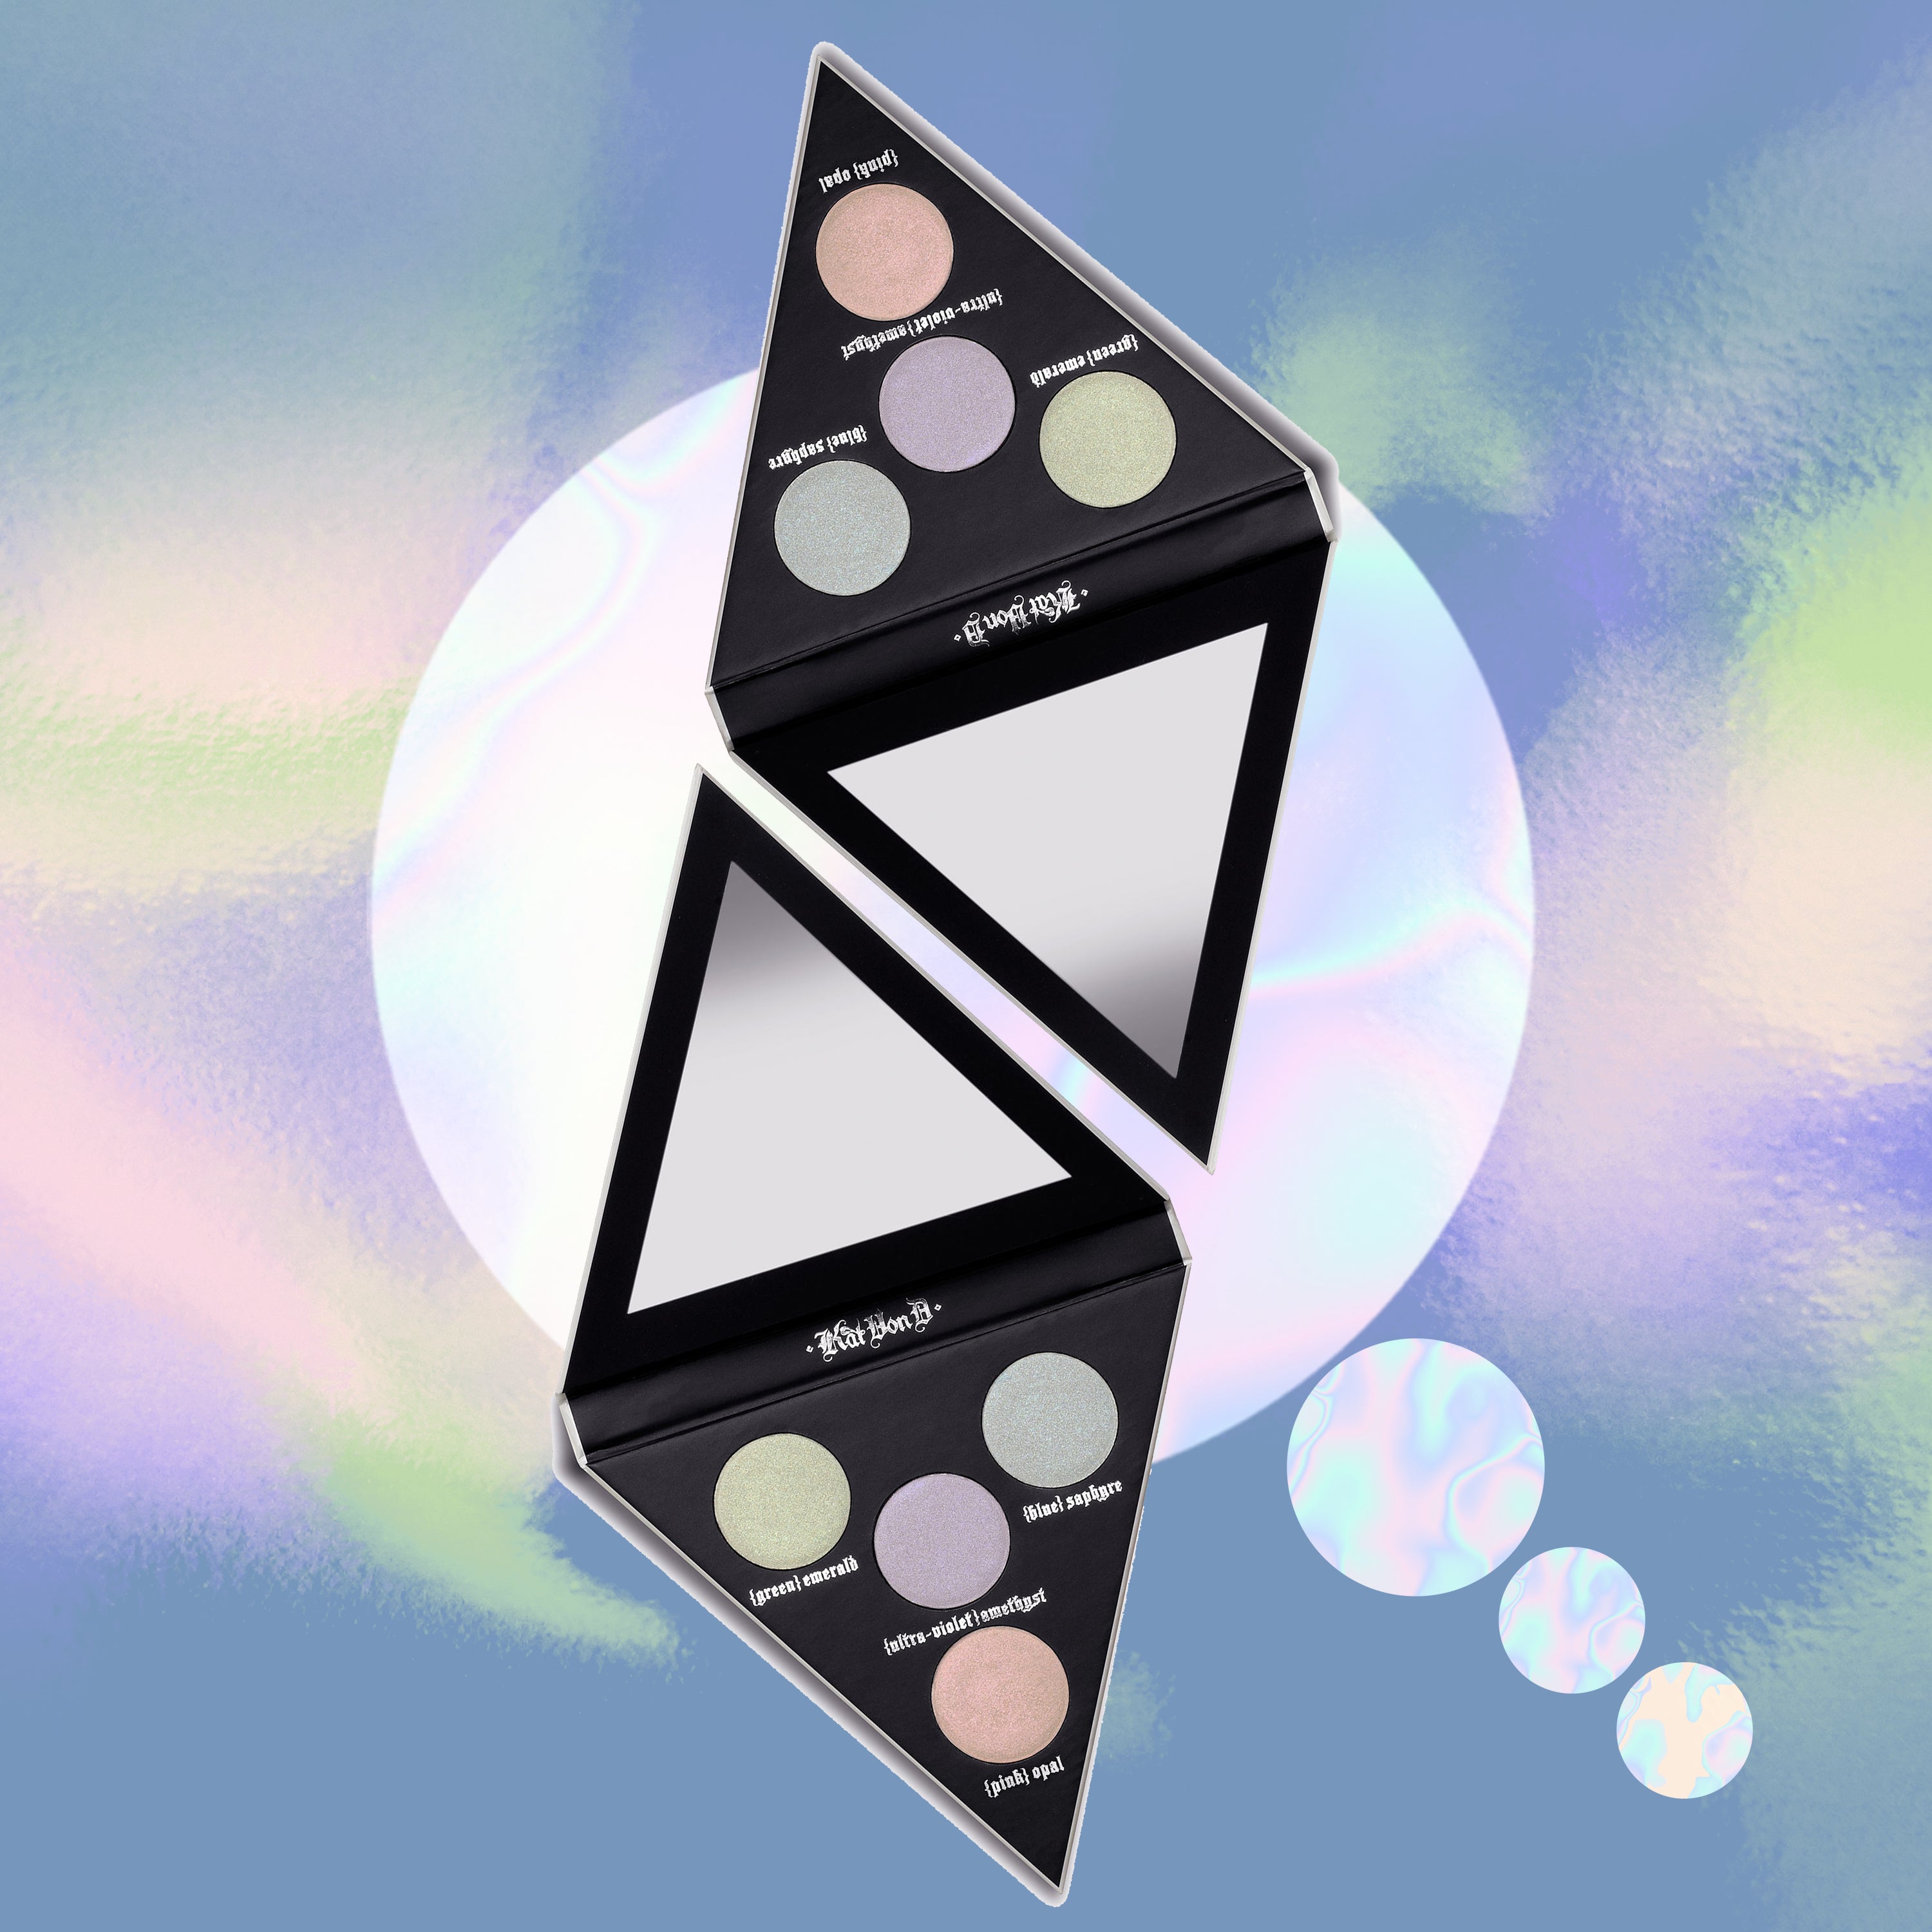 15 Holographic Makeup Products You Need For An Otherworldly Glow
